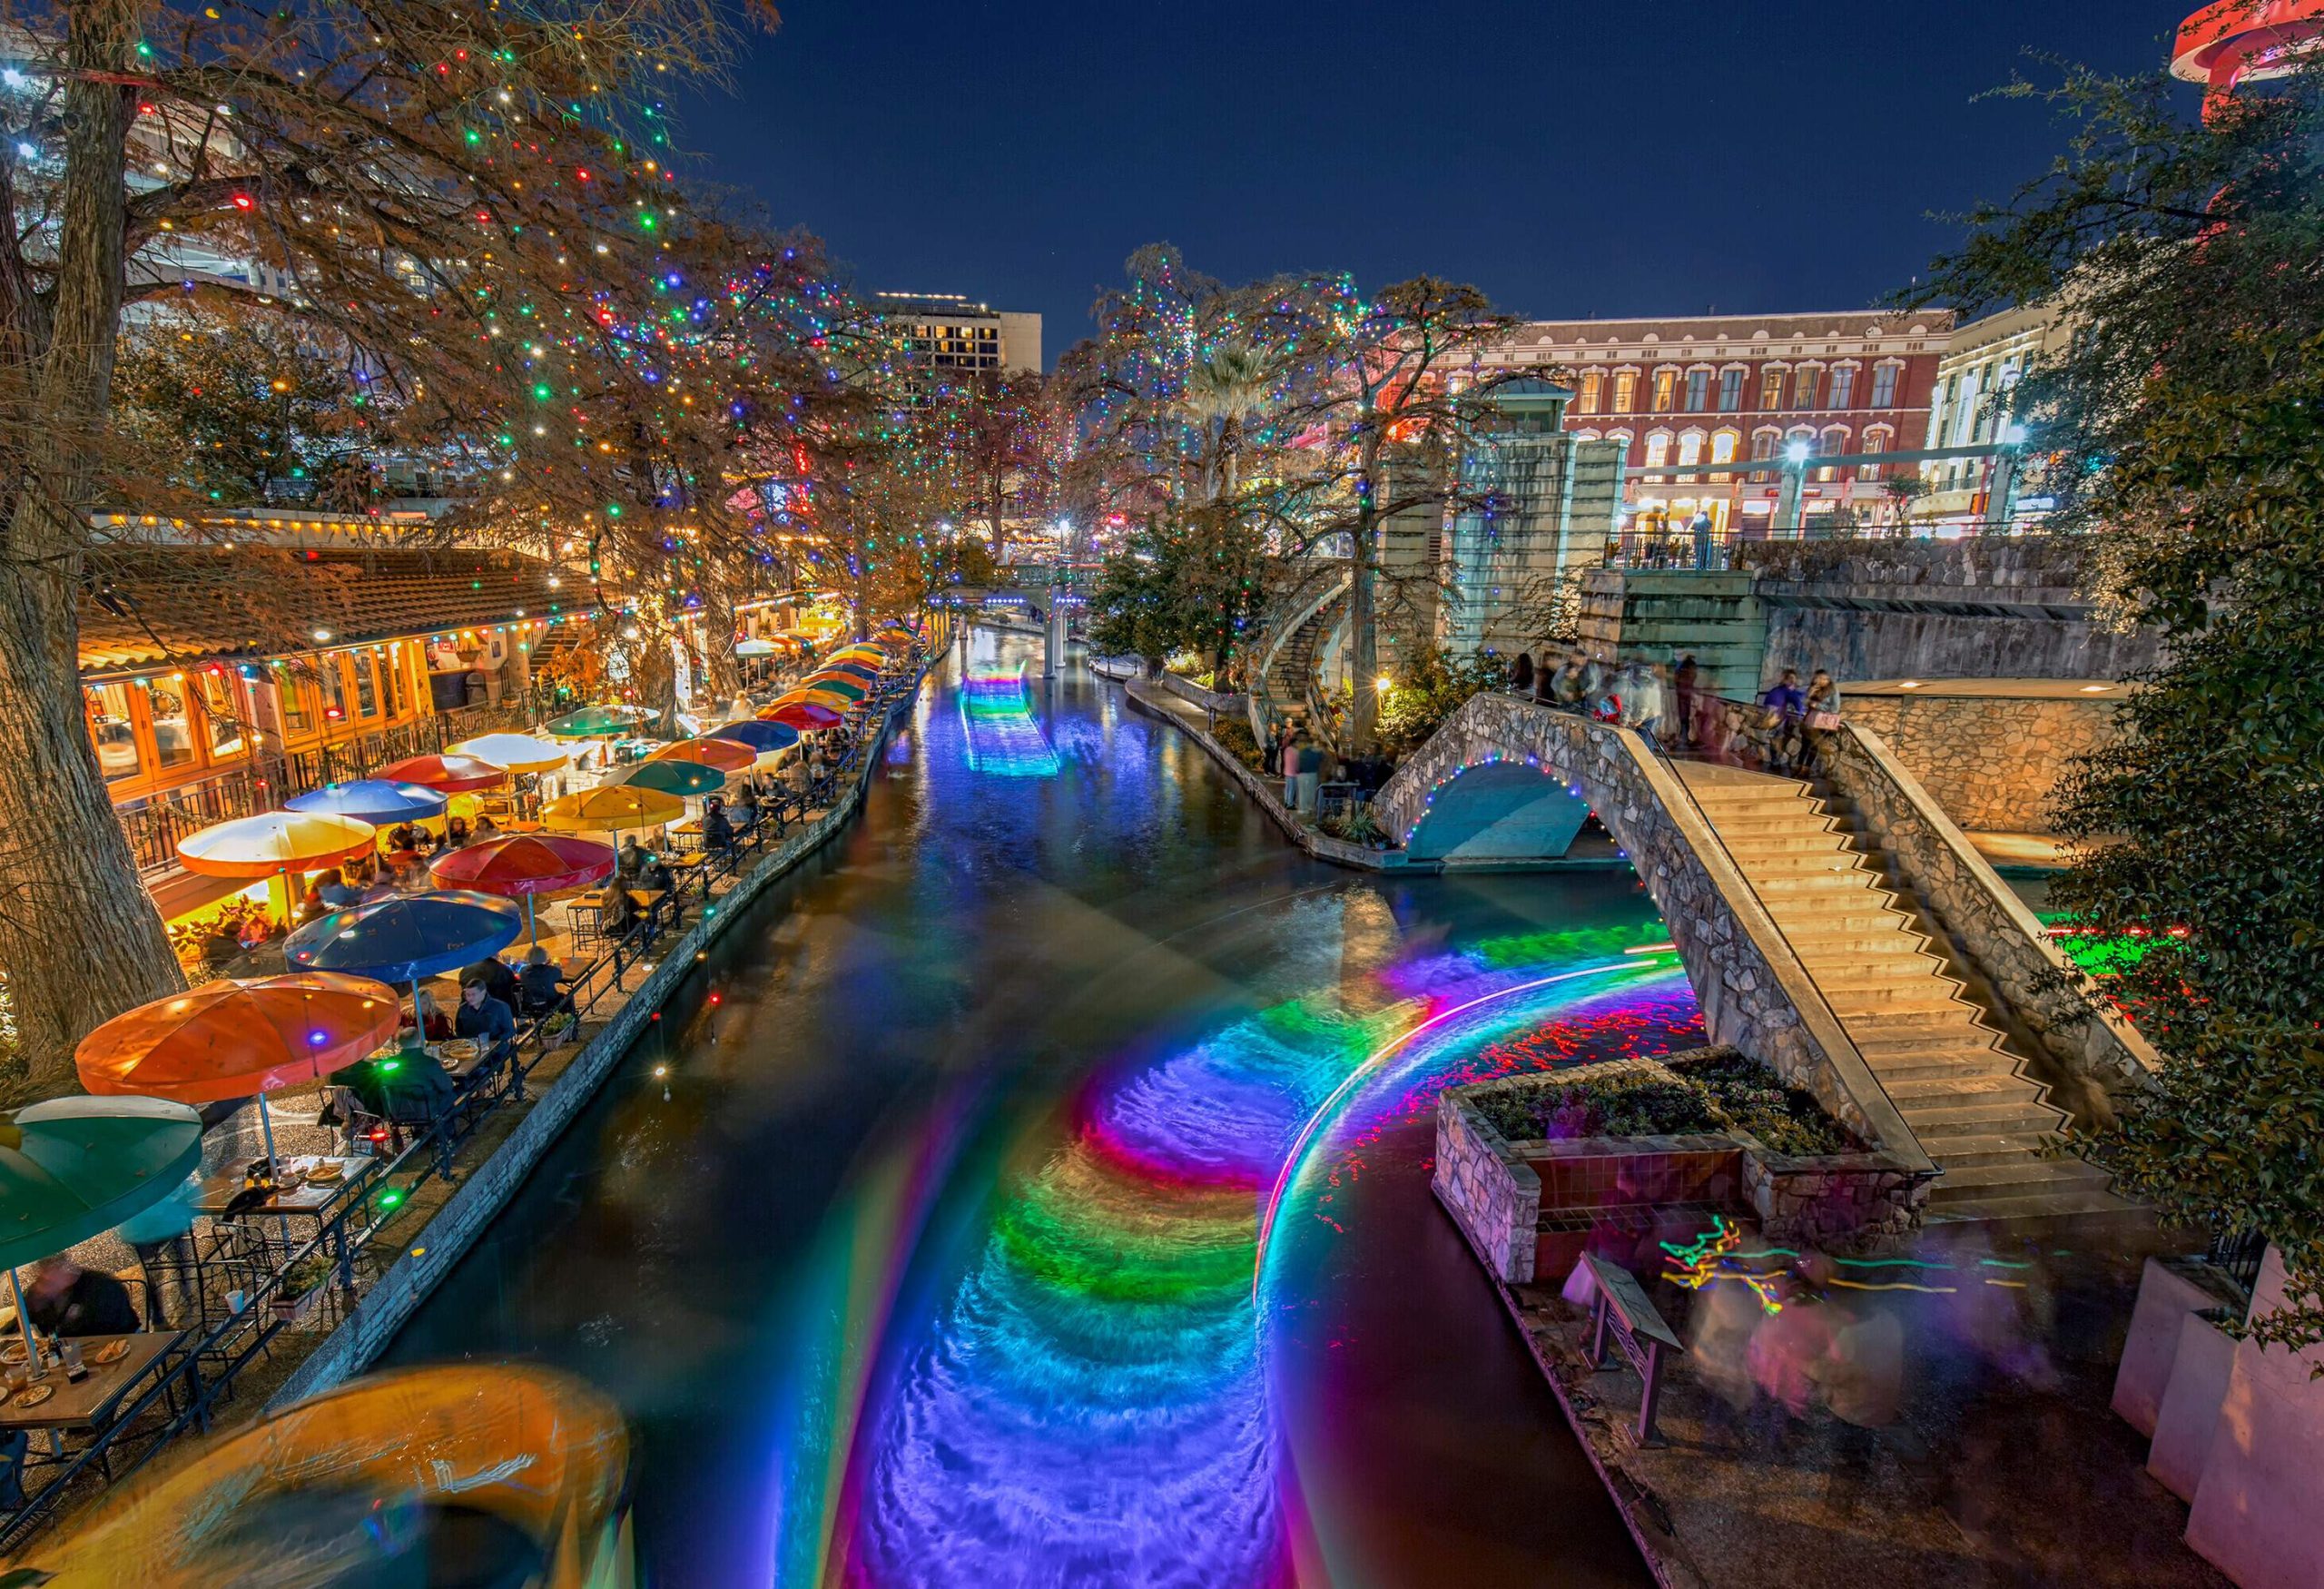 A popular esplanade with outdoor chairs and tables runs alongside a canal with rainbow water splash.